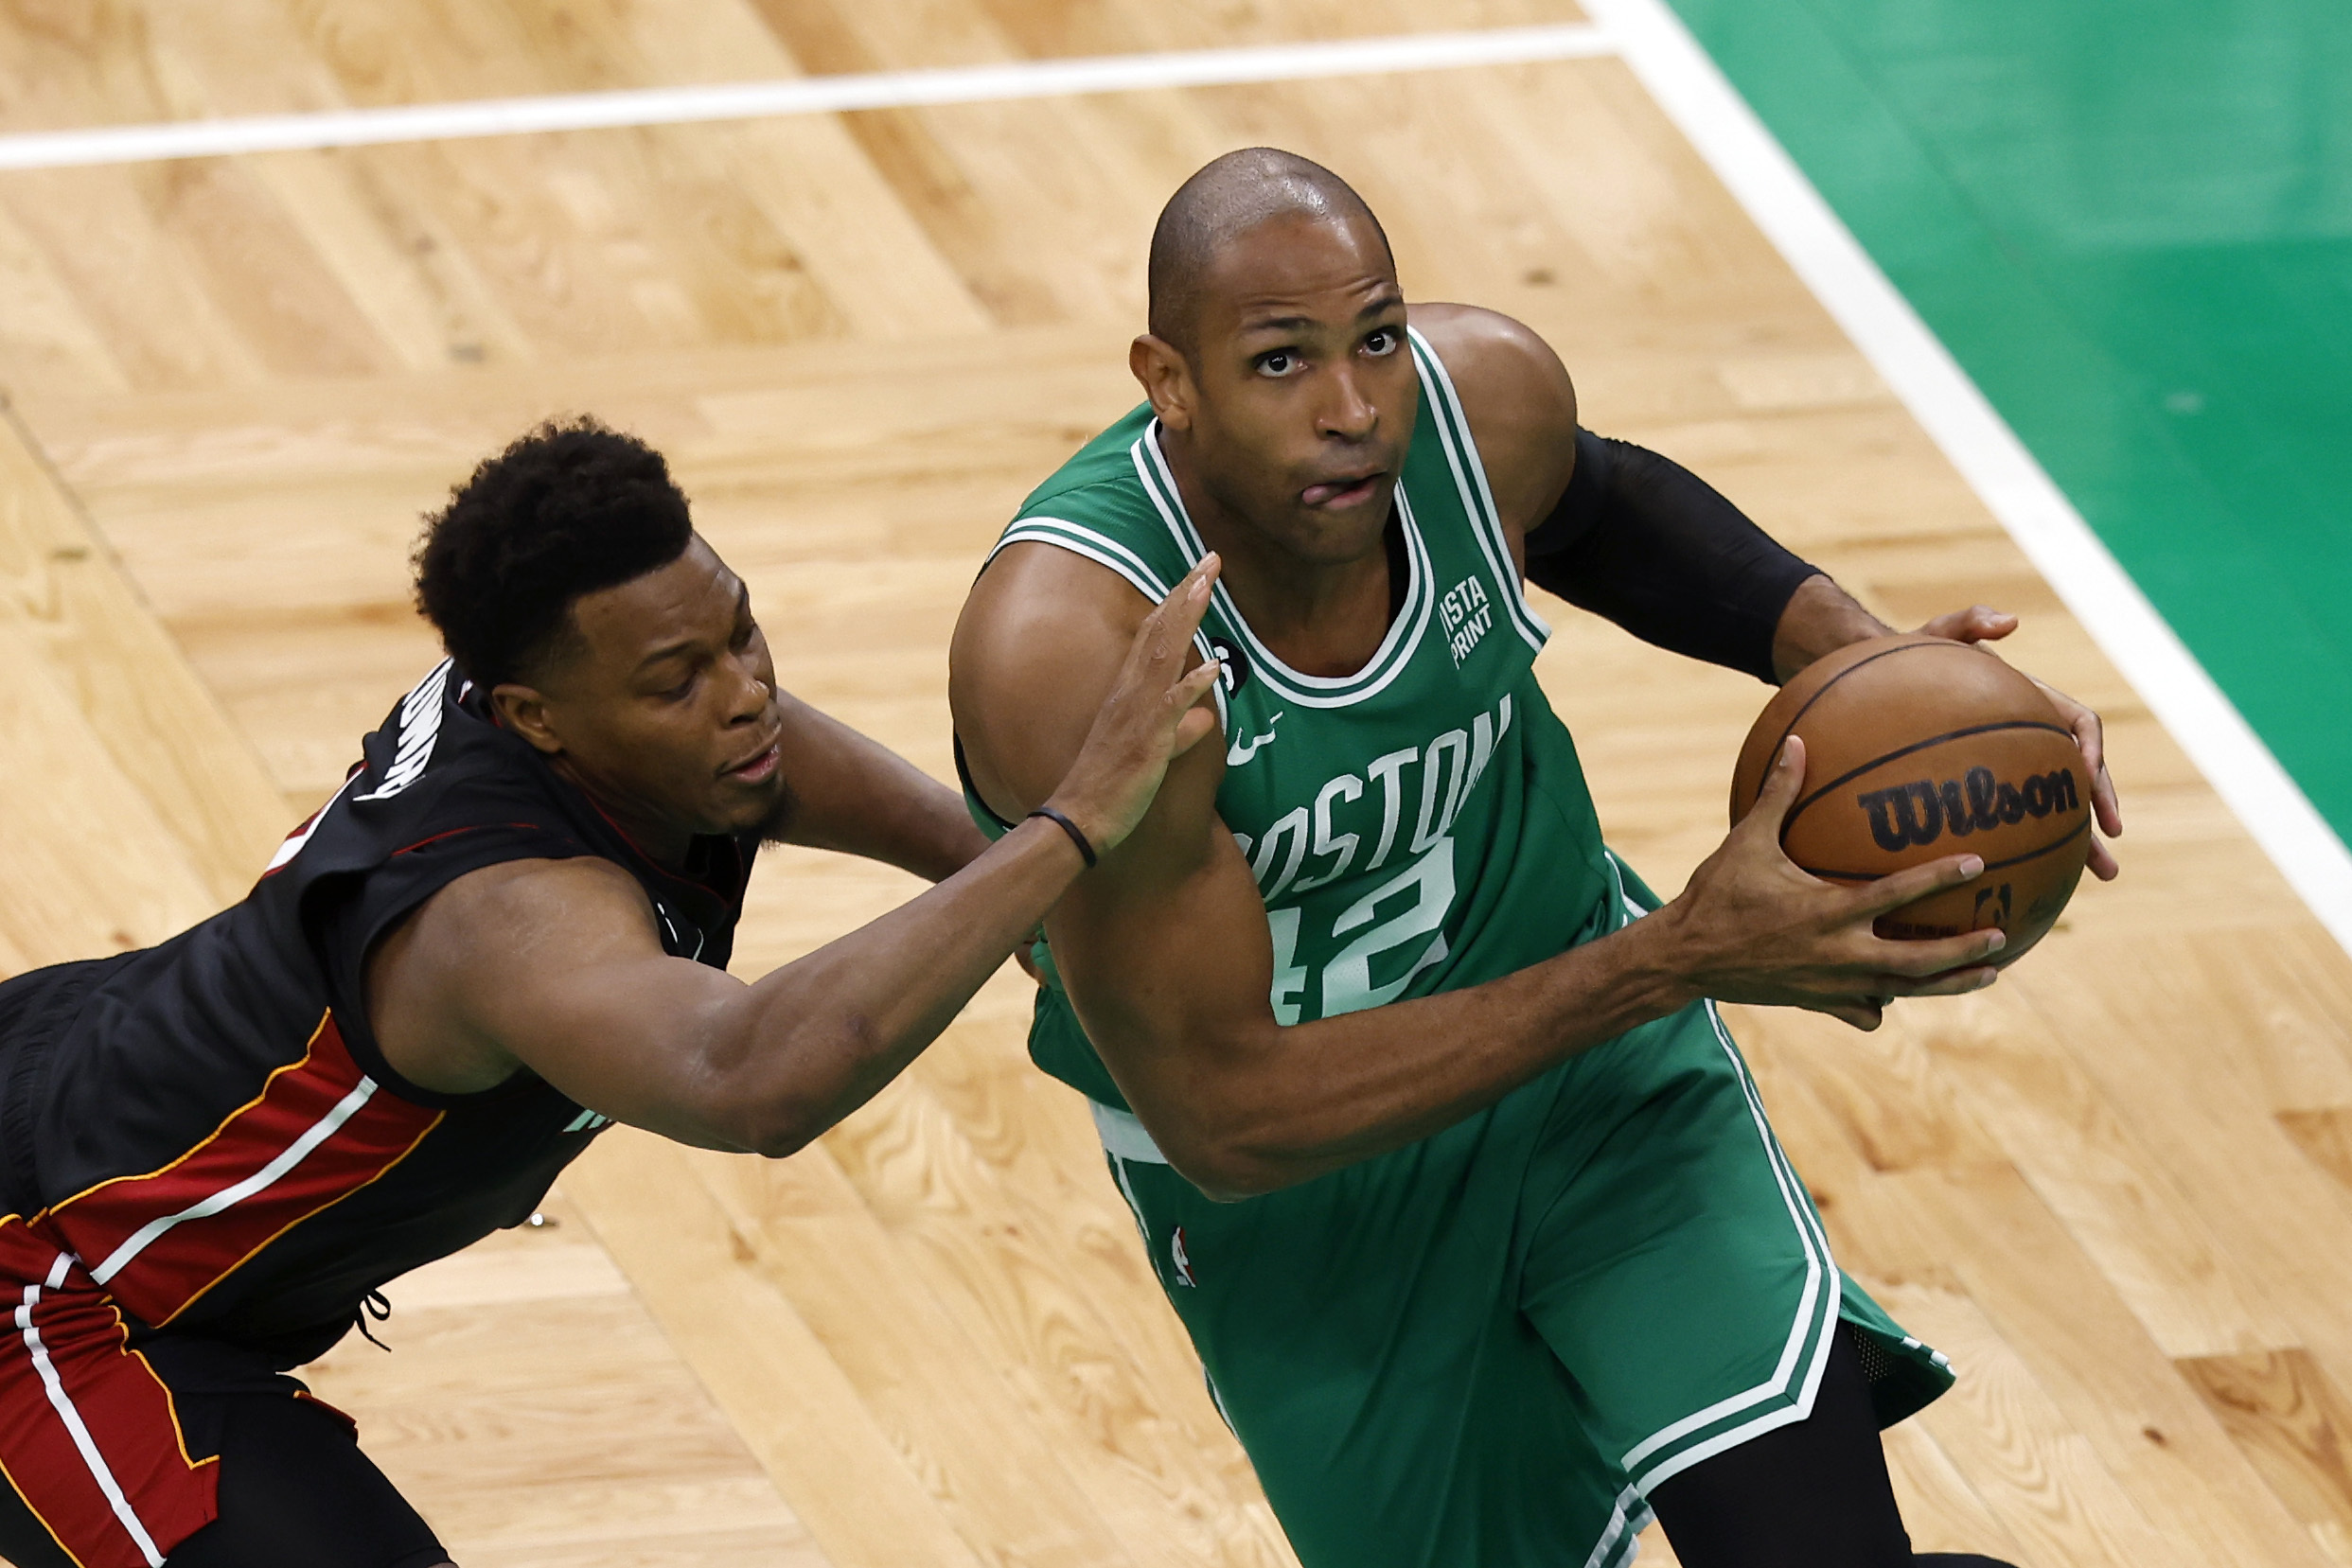 Boston Celtics Beat Miami Heat in Game 7 for Trip to N.B.A. Finals - The  New York Times